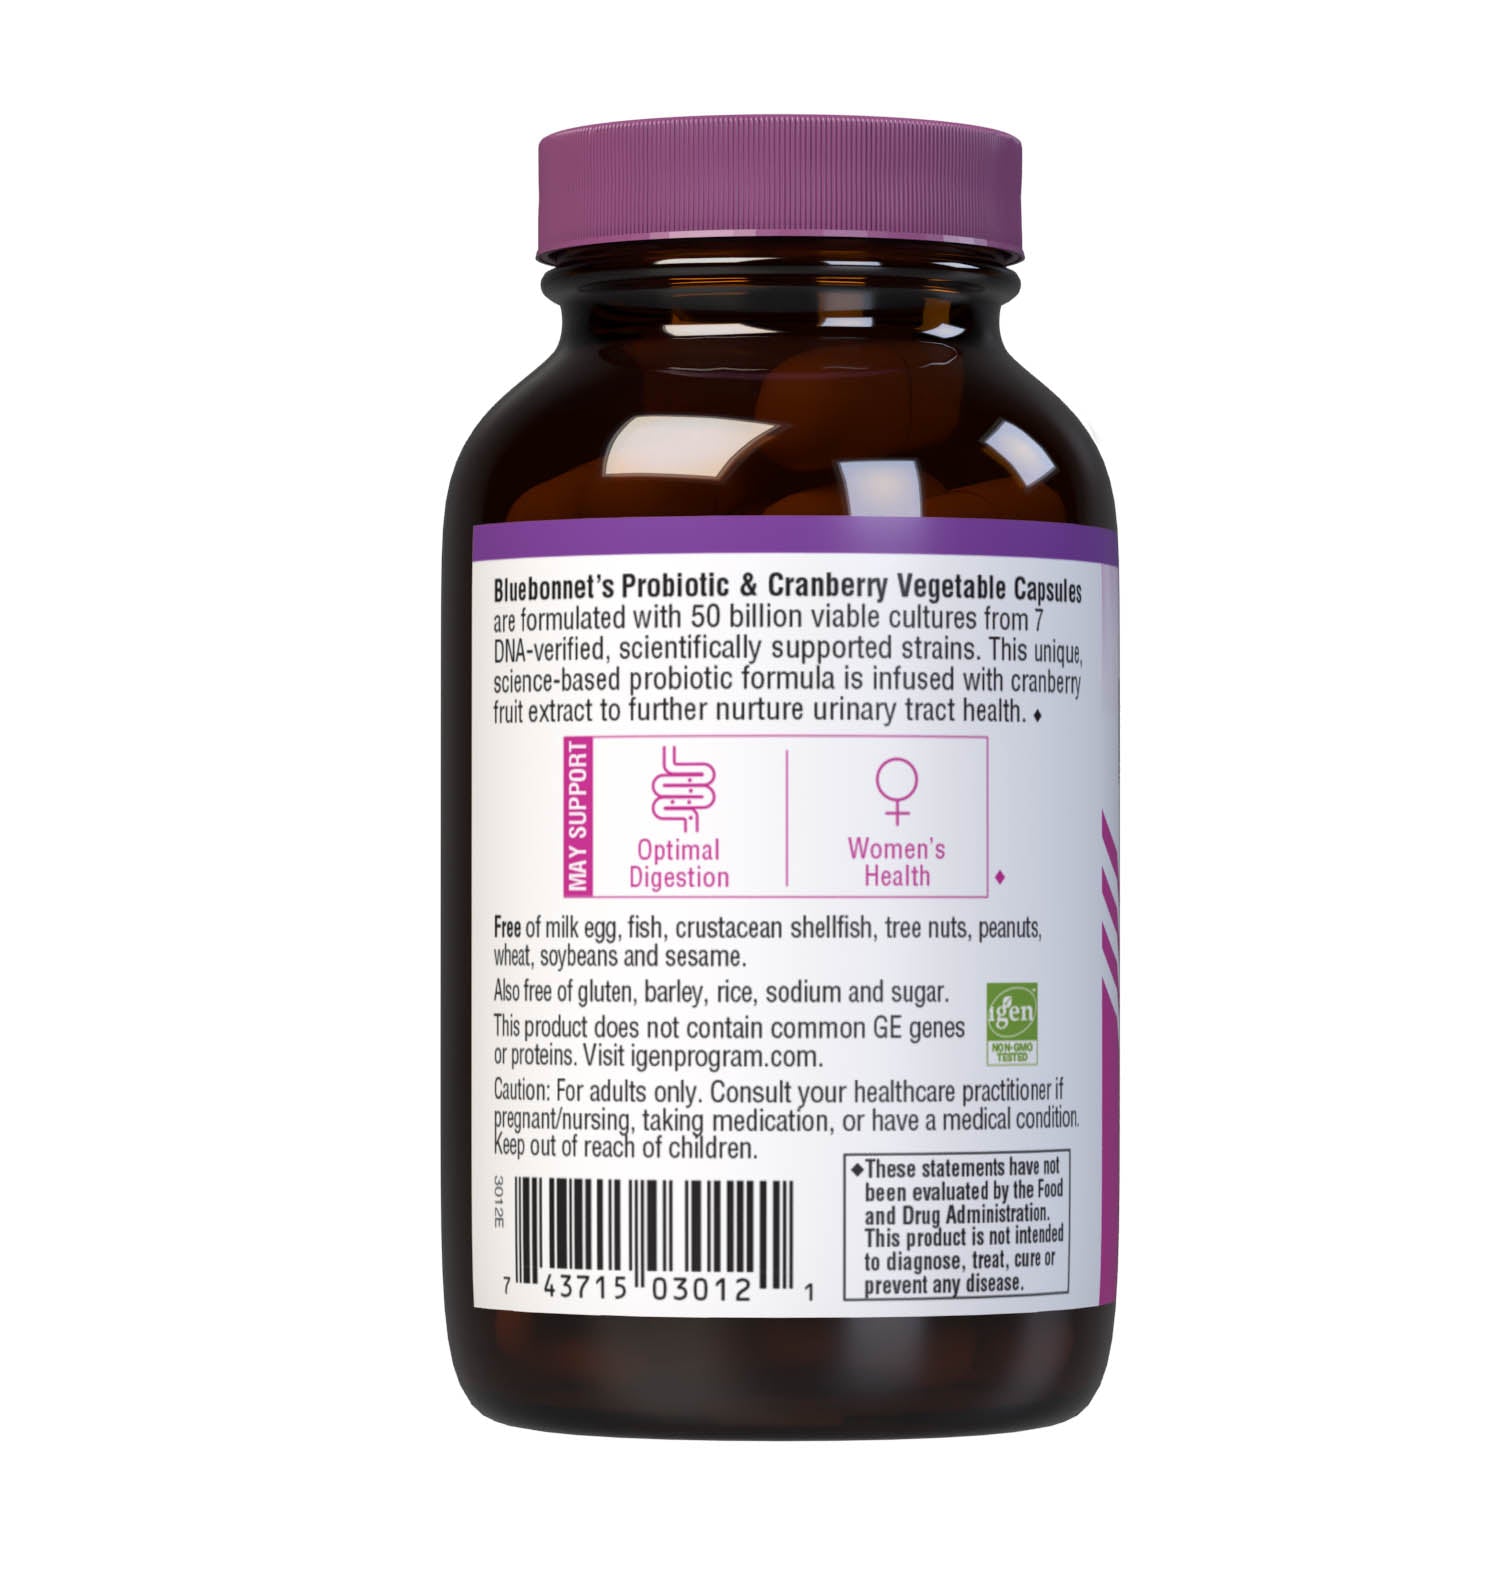 Bluebonnet’s Probiotic & Cranberry 30 Vegetable Capsules are formulated with 50 billion viable cultures from 7 DNA-verified, scientifically supported strains. This unique, science-based probiotic formula is infused with cranberry fruit extract to further nurture urinary tract health. Description panel. #size_30 count